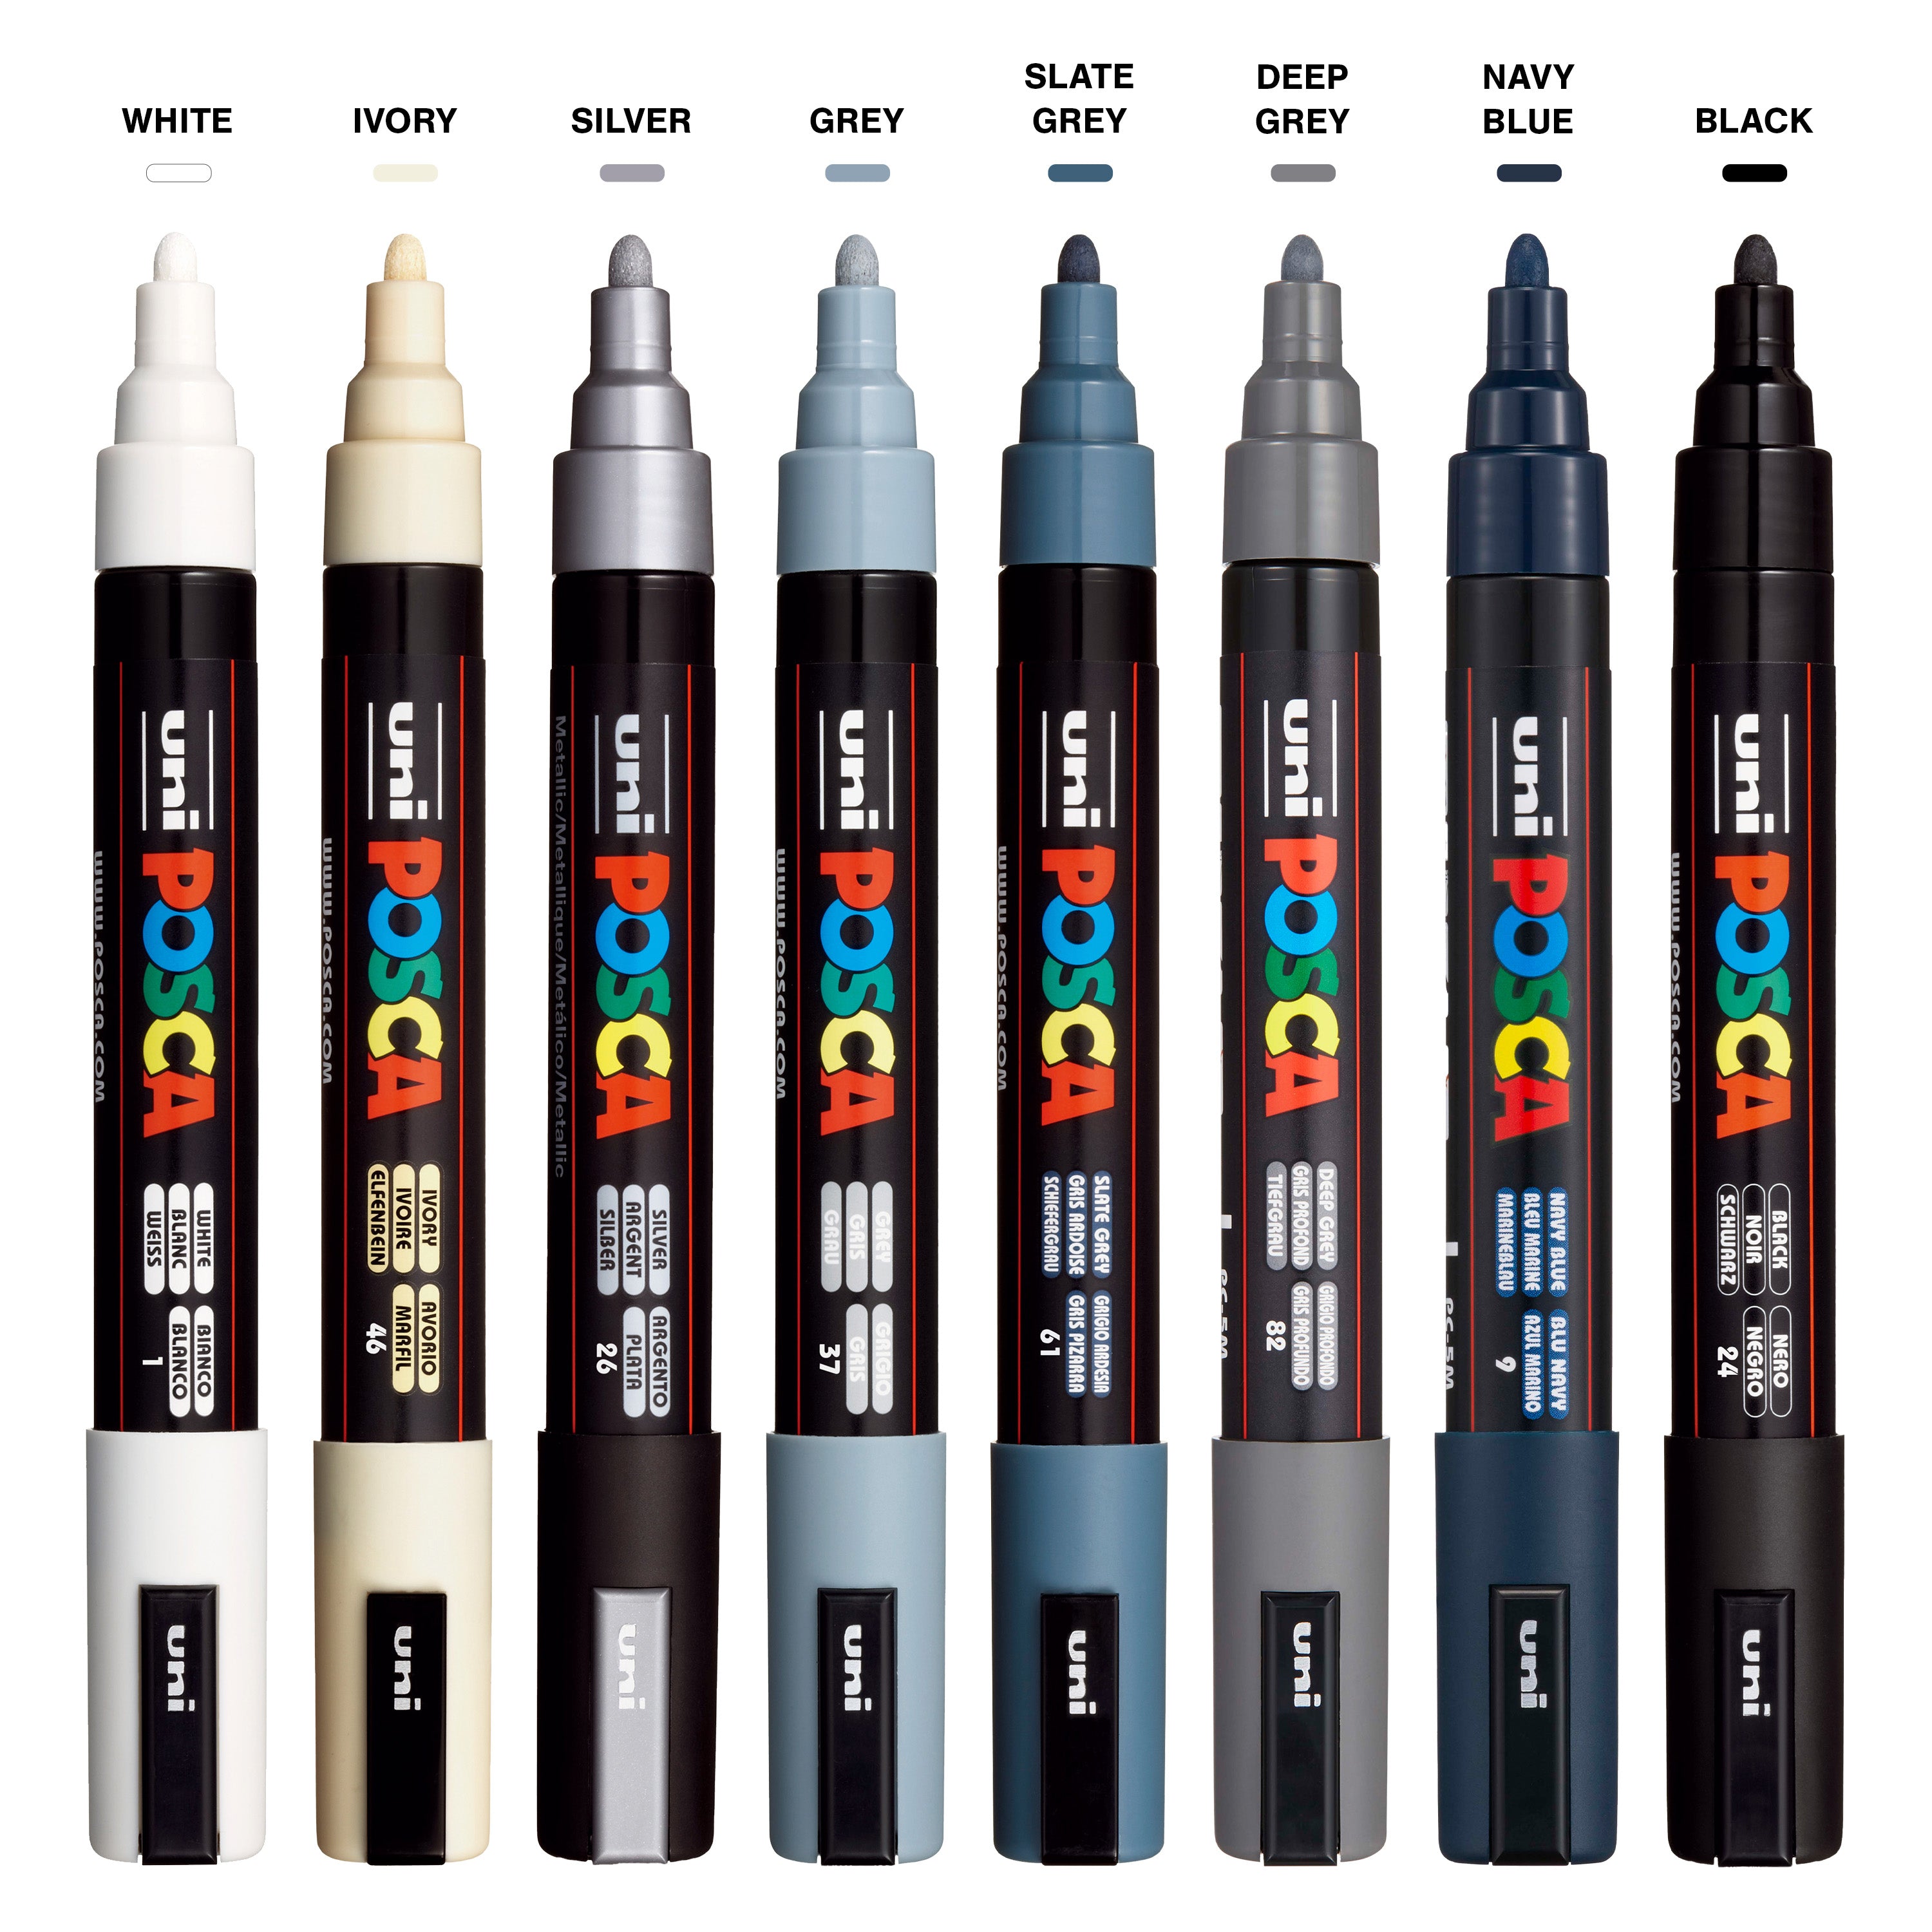 uni® POSCA® PC-5M, Monotone Water-Based Paint Markers (8 Pack)